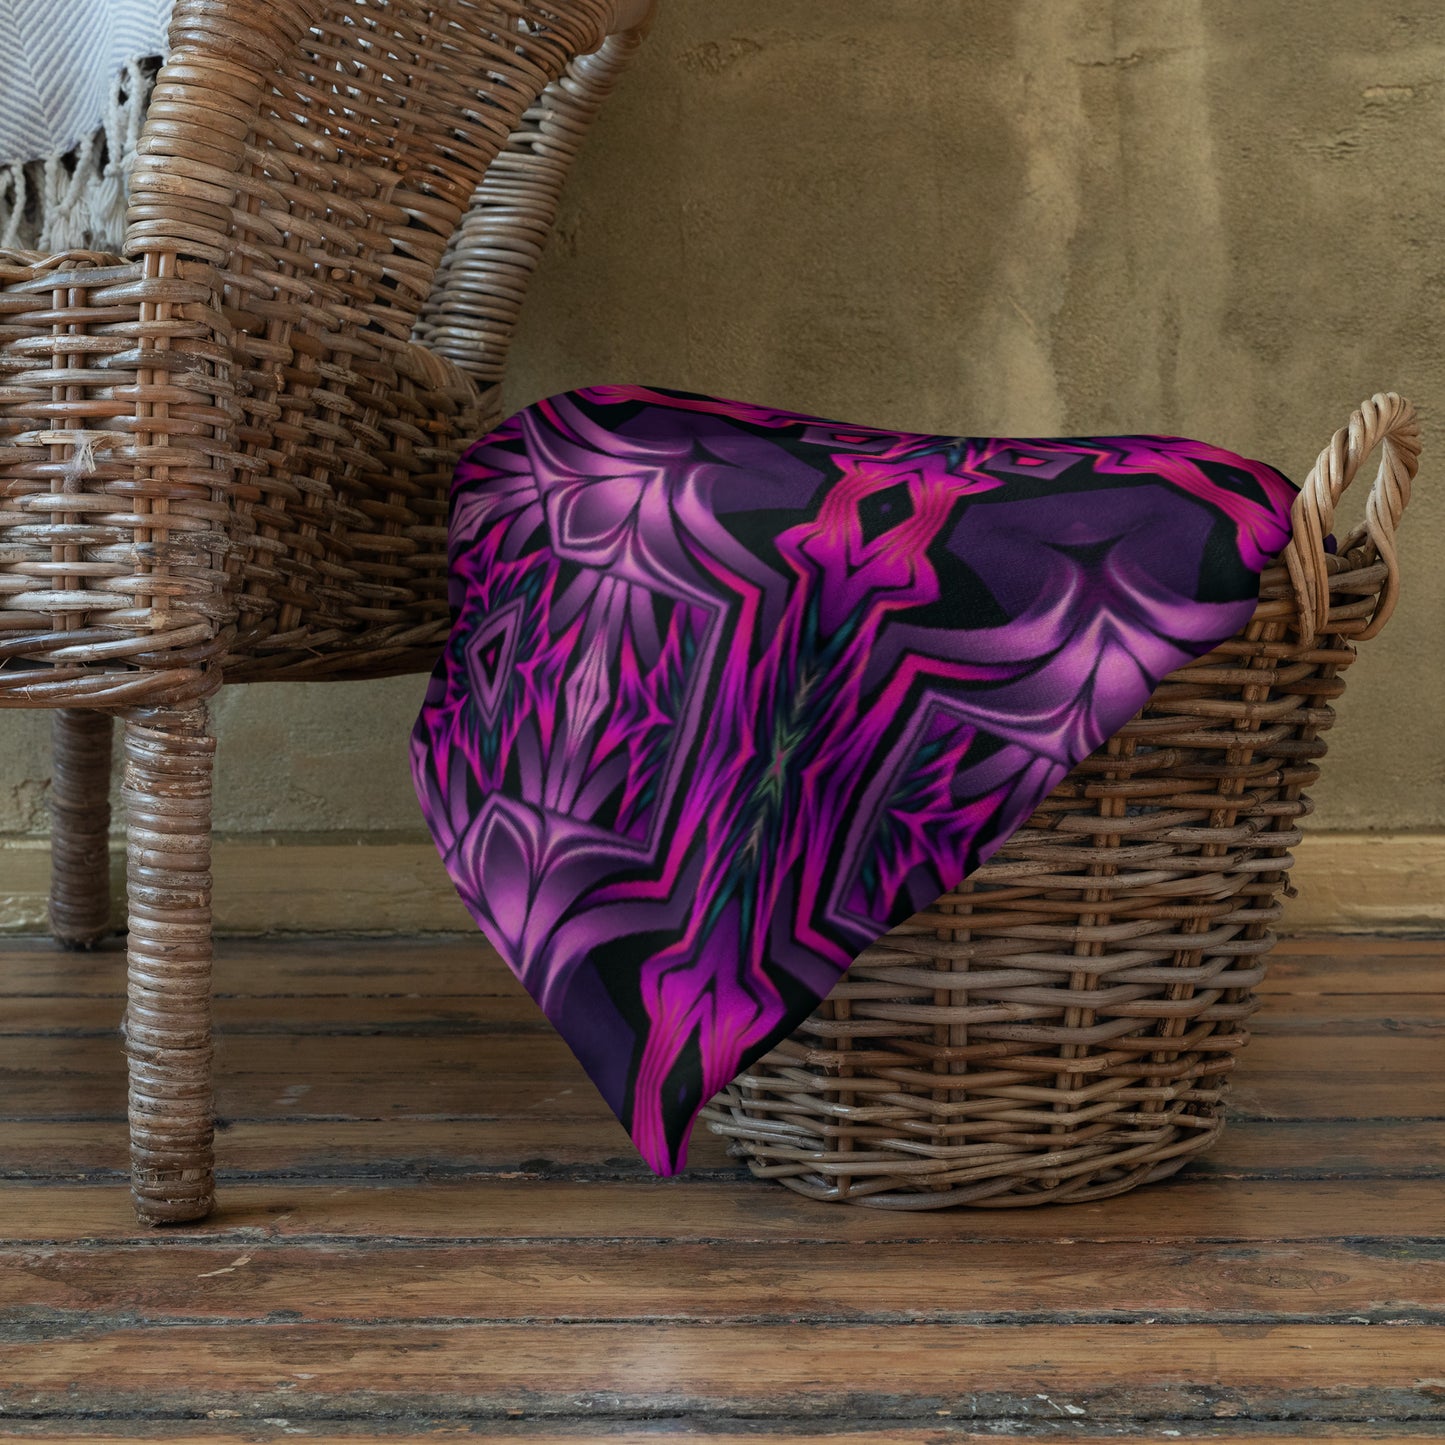 "Forged In Neon" - Psychedelic Pattern THROW BLANKET